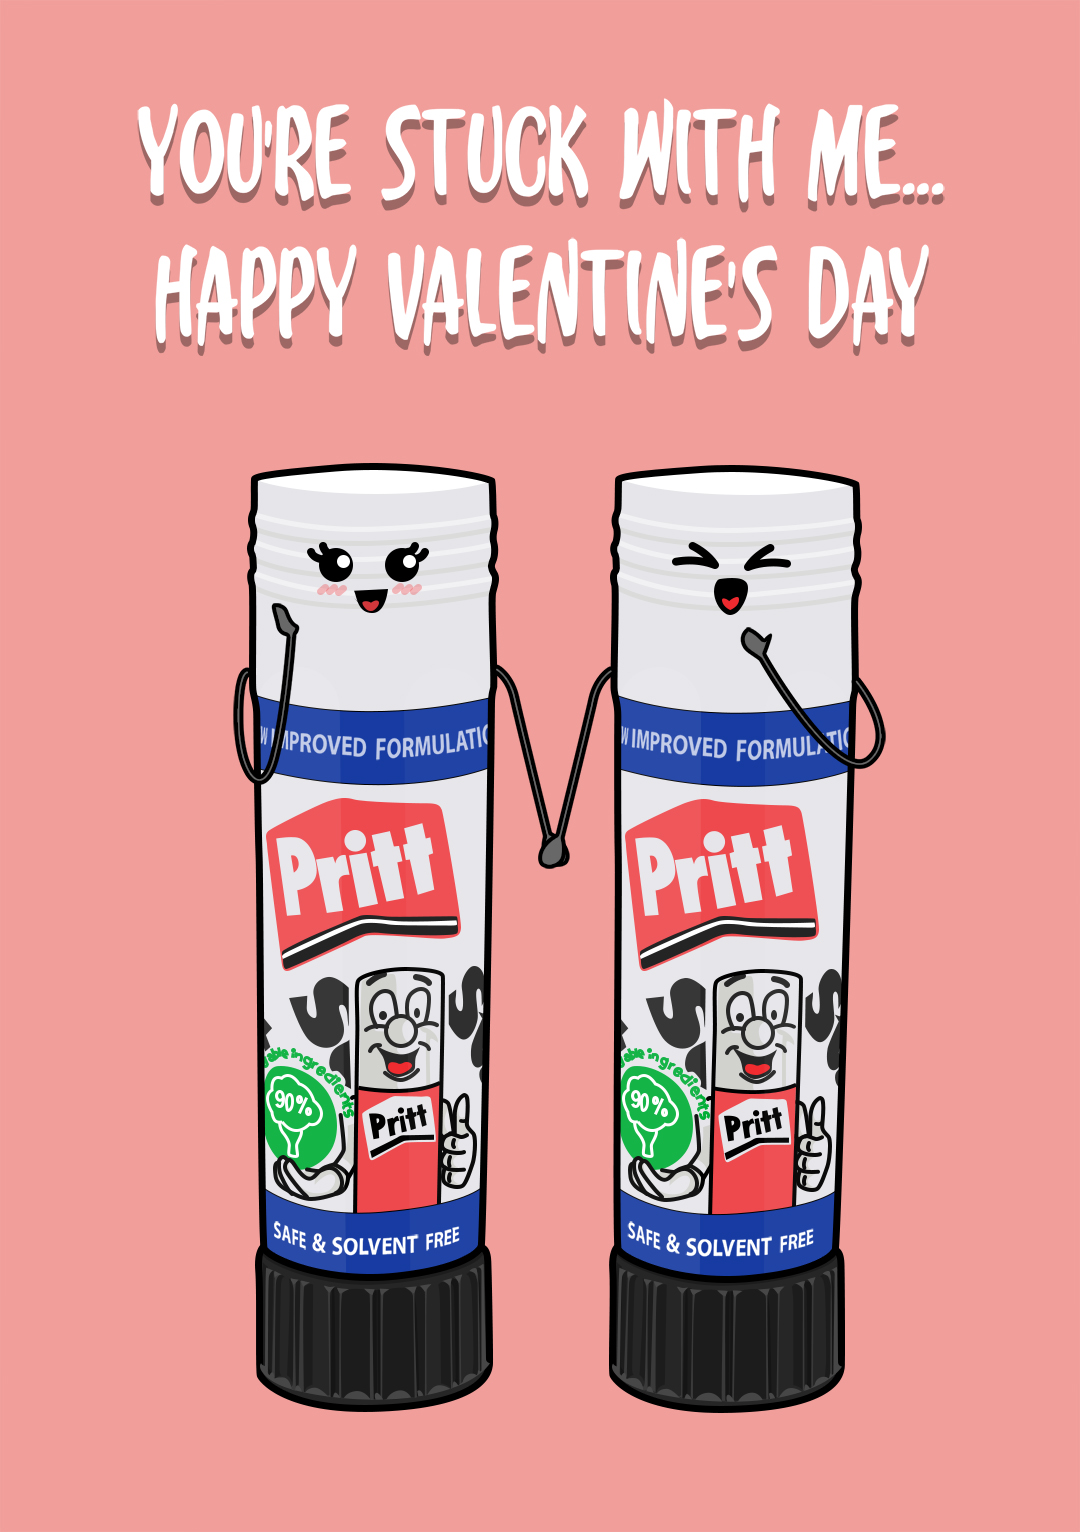 You're Stuck With Me - Funny Pritt Stick Valentine's Card